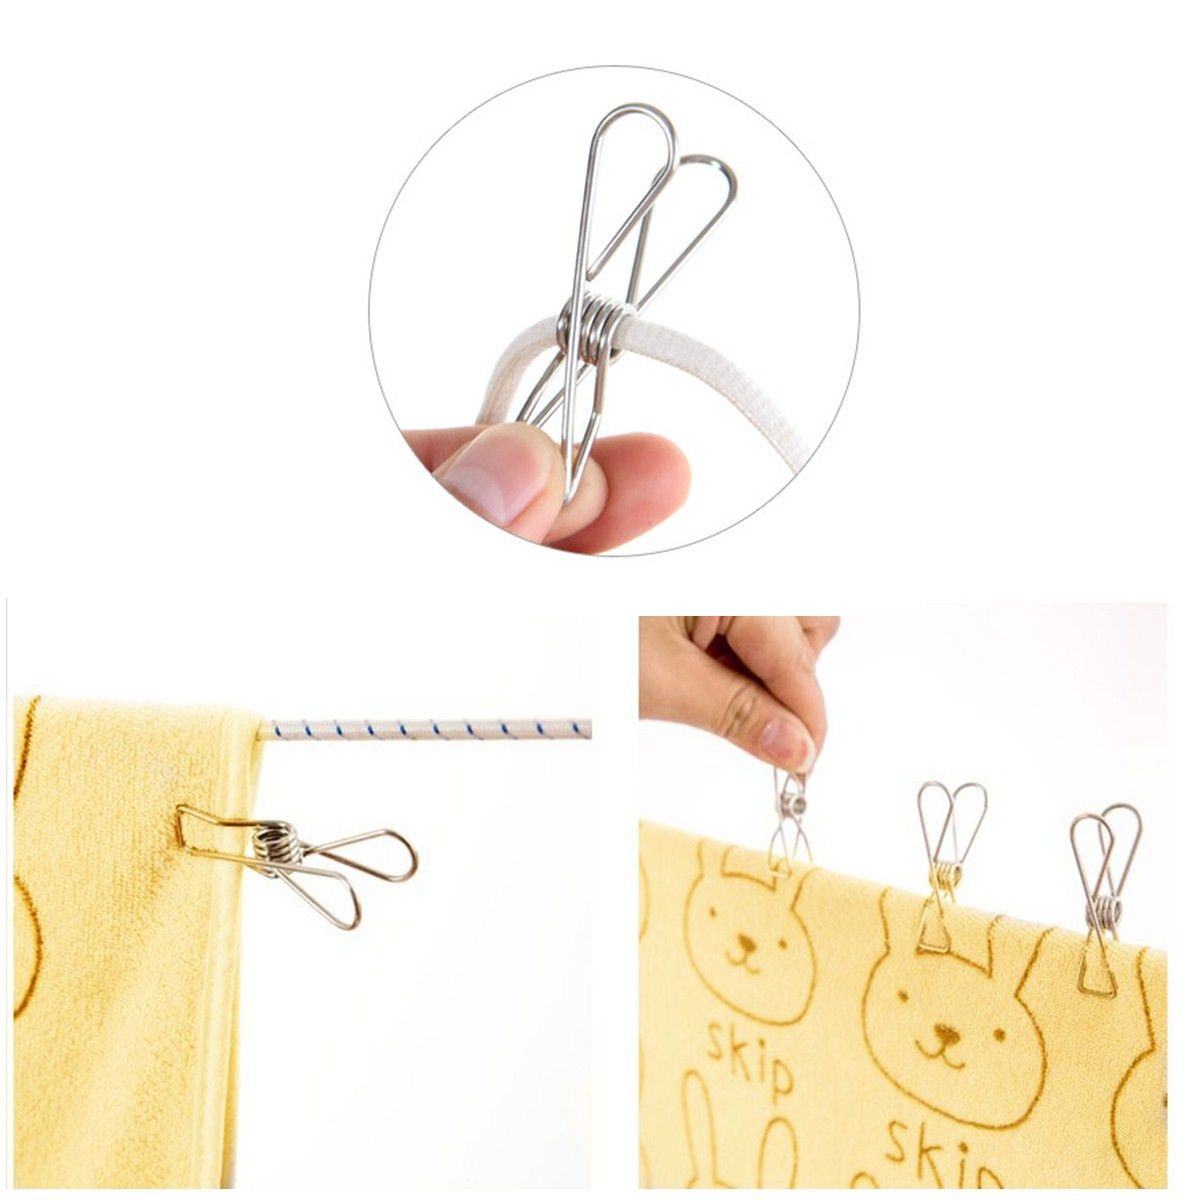 8Pcs-Big-Size-Clothes-Metal-Wire-Clips-85cm-Hanger-Pegs-for-Socks-Underwear-Towel-Sheet-1175566